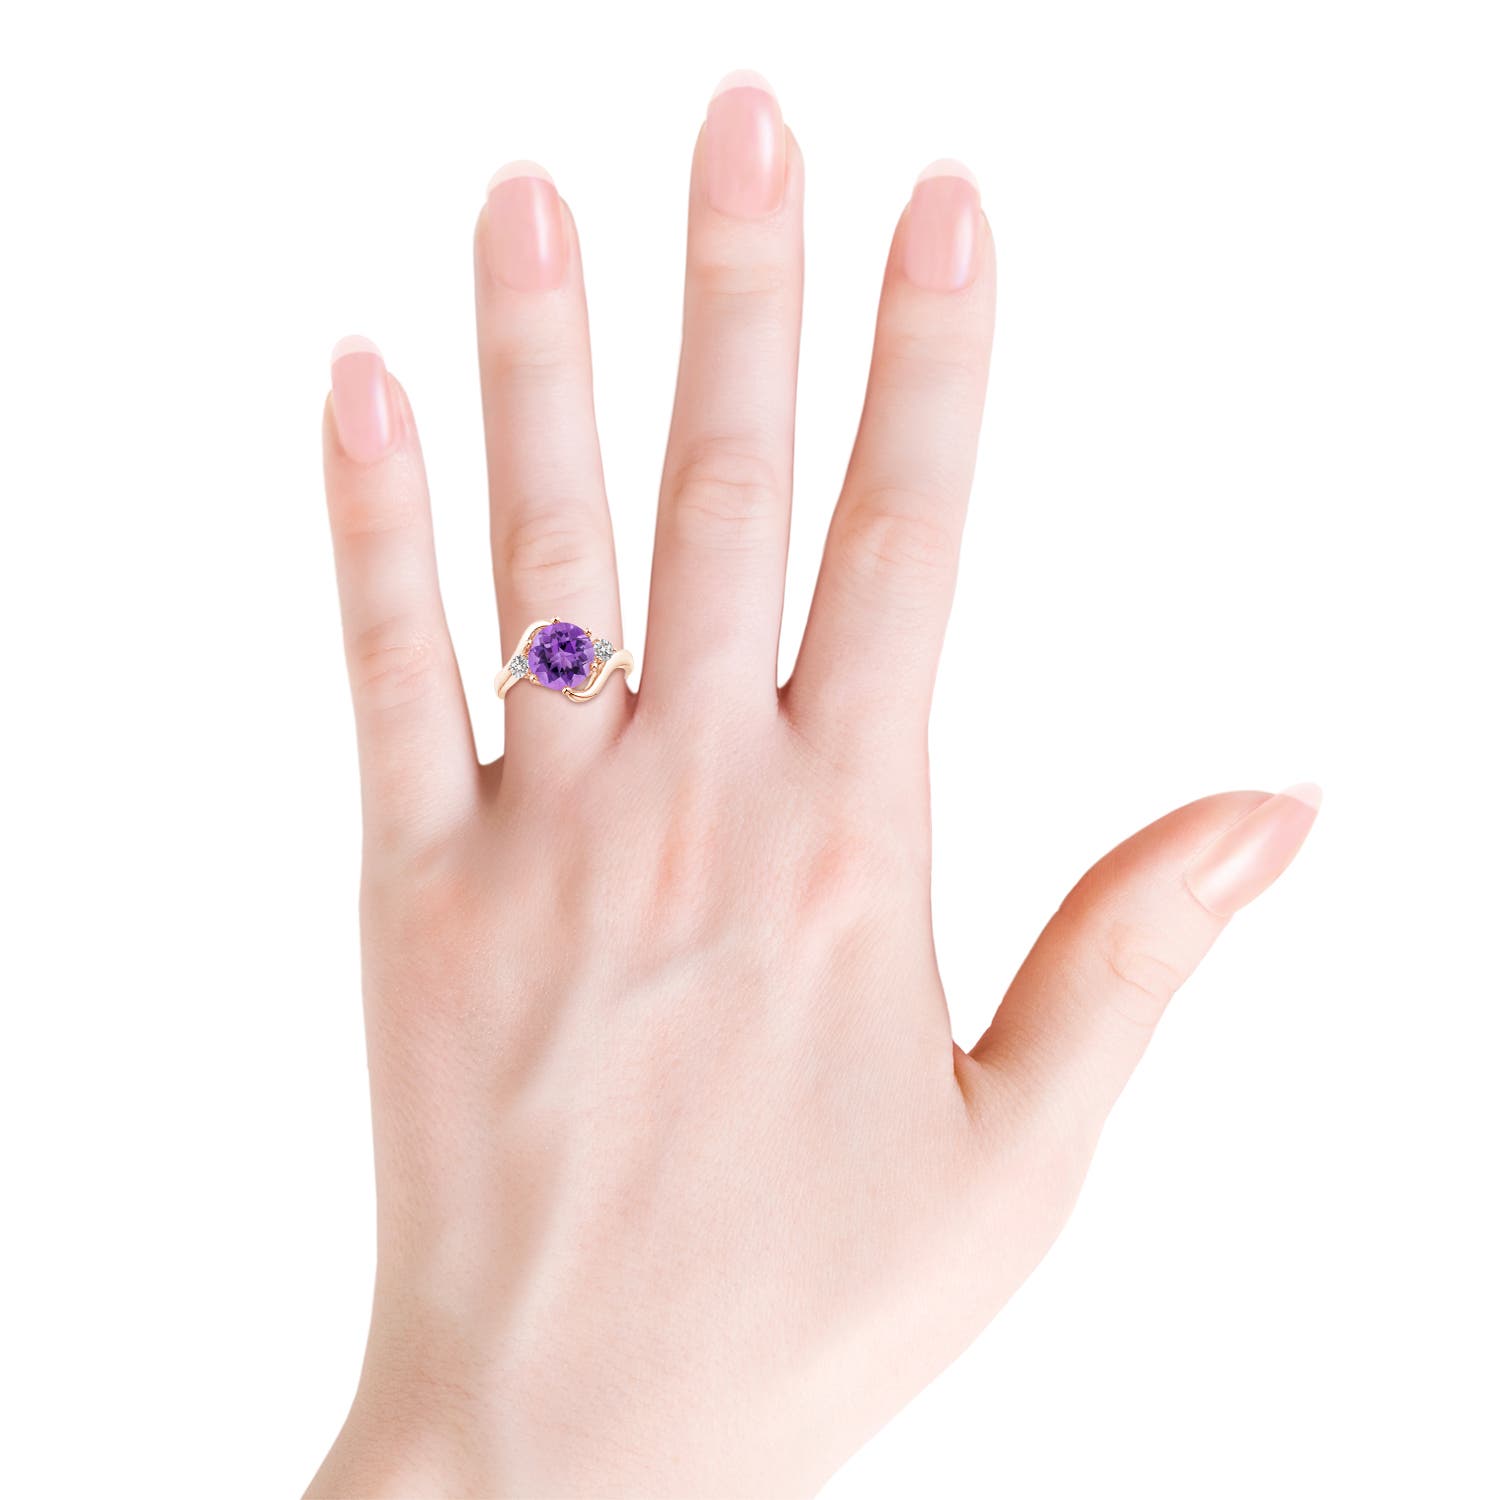 AA - Amethyst / 2.31 CT / 14 KT Rose Gold